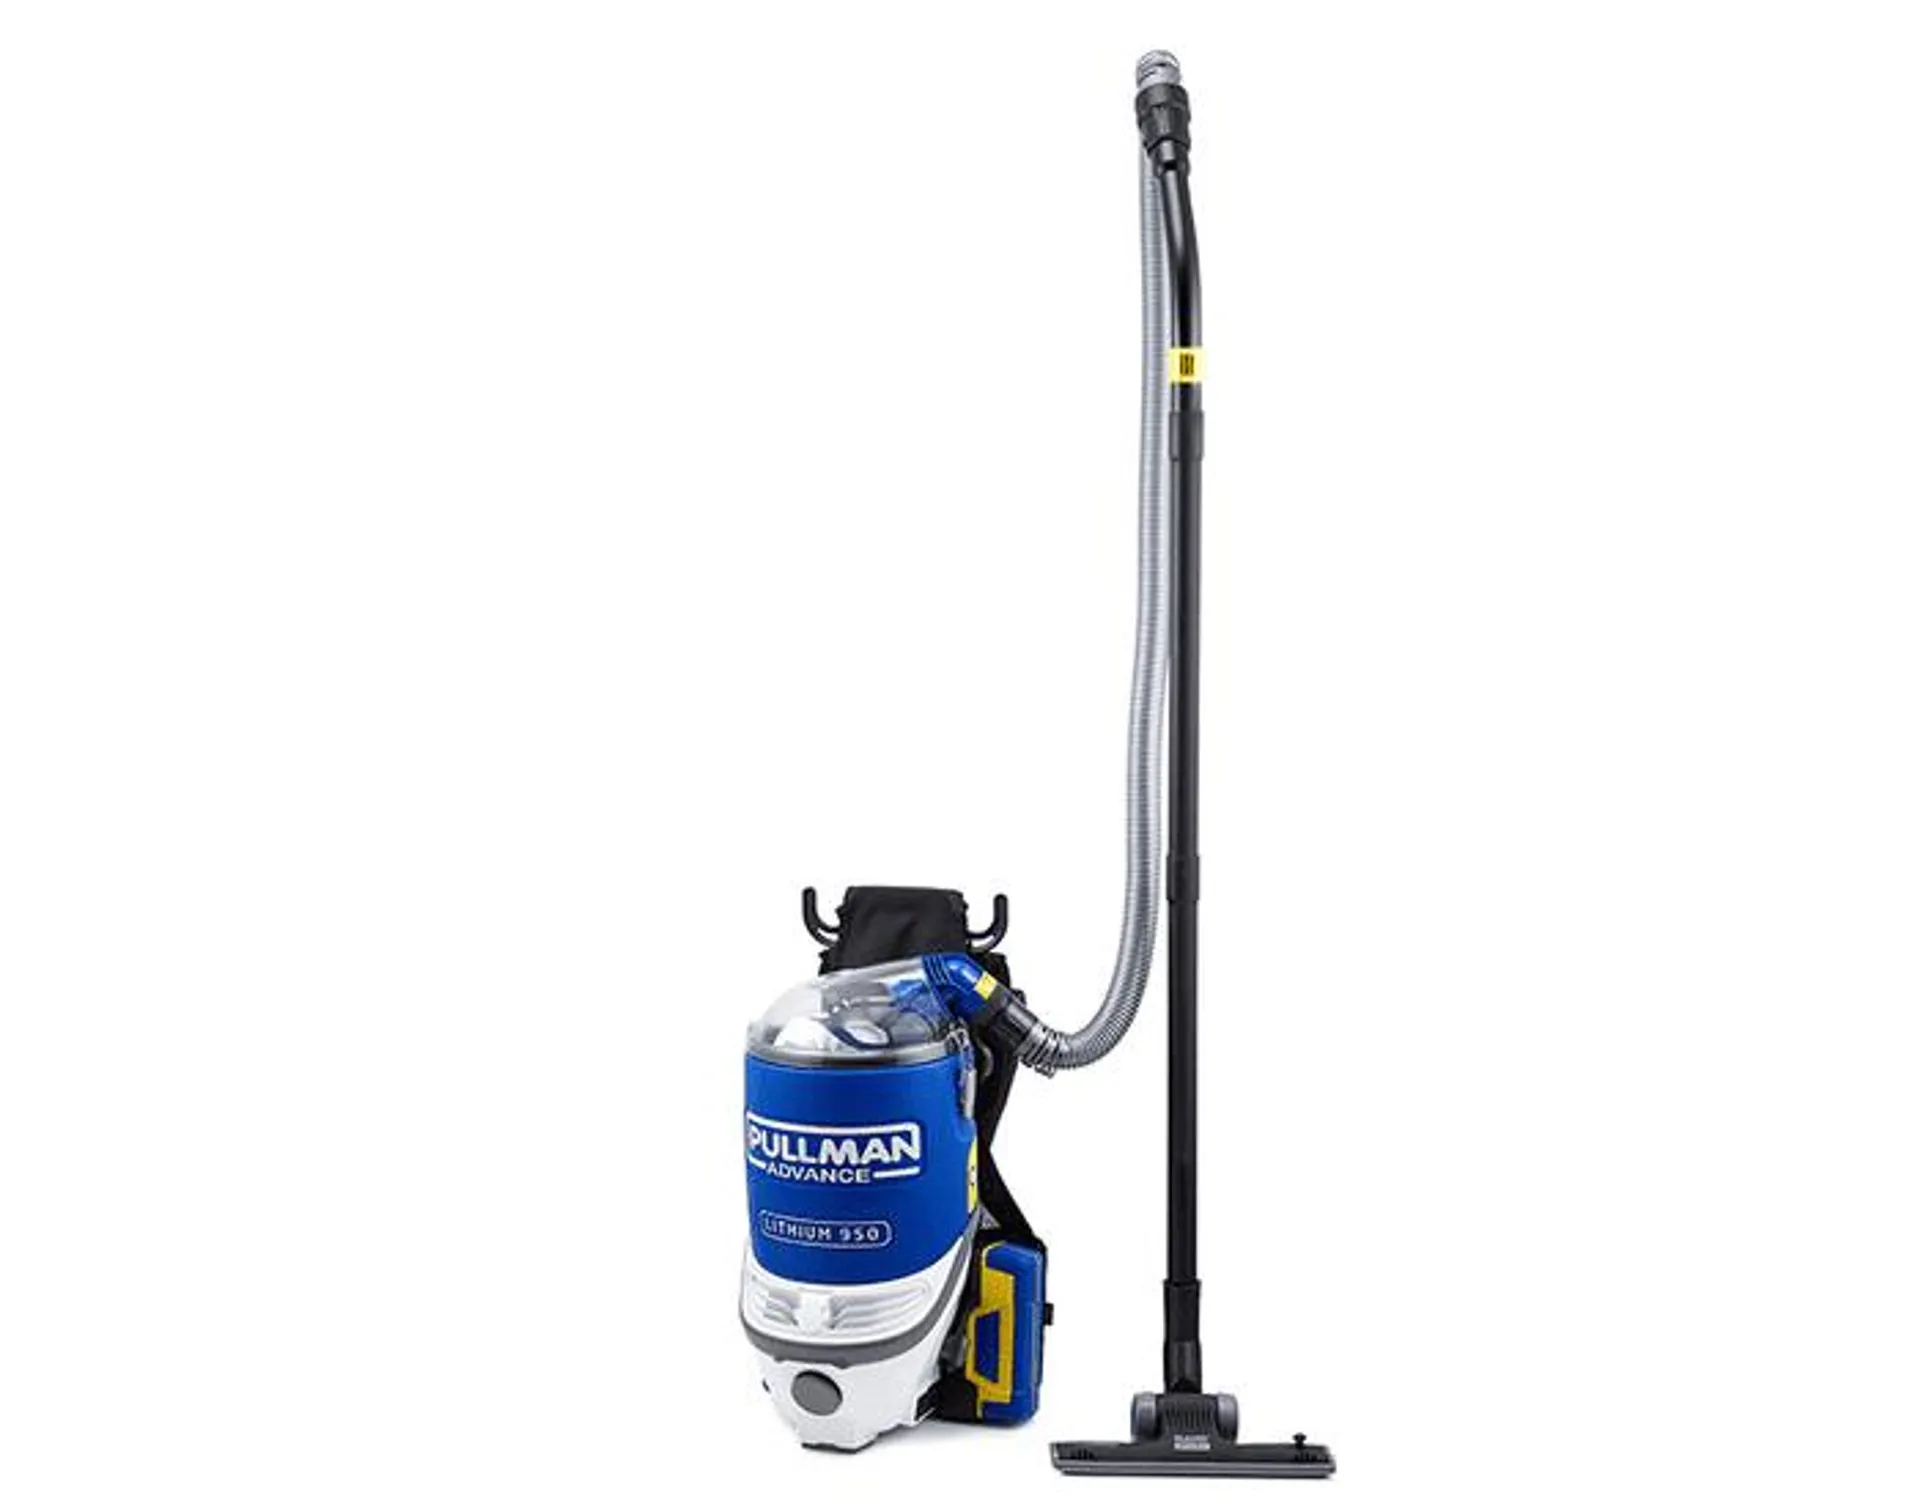 Pullman Advance PL950 Lithium Cordless Backpack Vacuum Cleaner